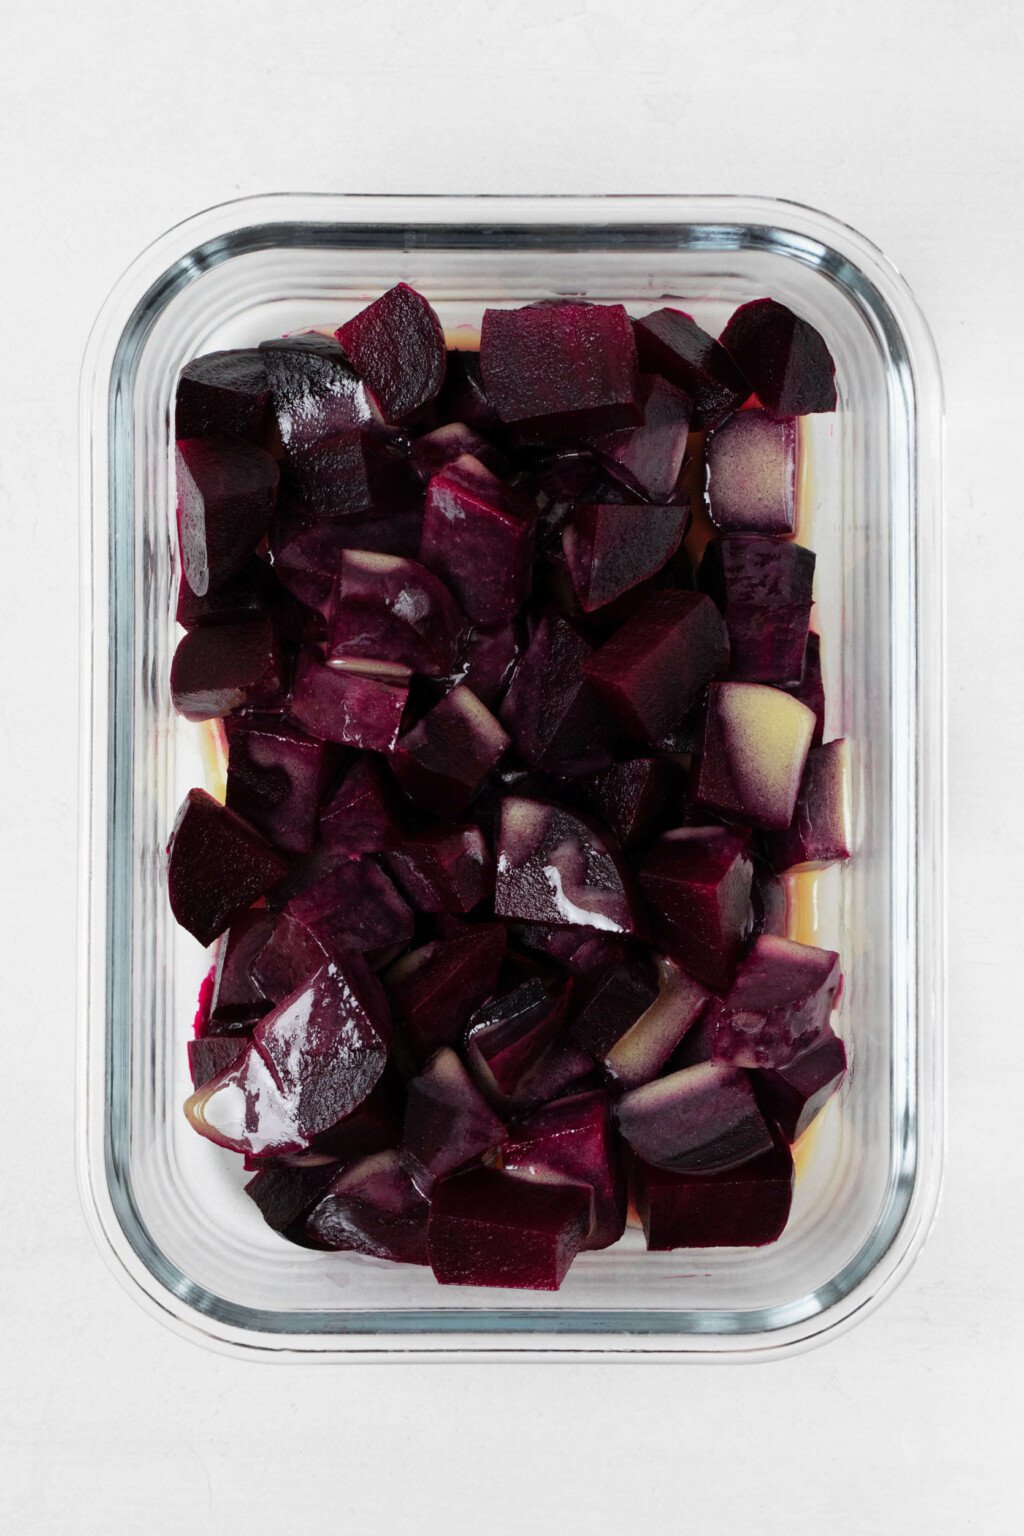 Roasted root vegetables are packed into a clear, glass-lock container. There's a bright colored vinaigrette on top.